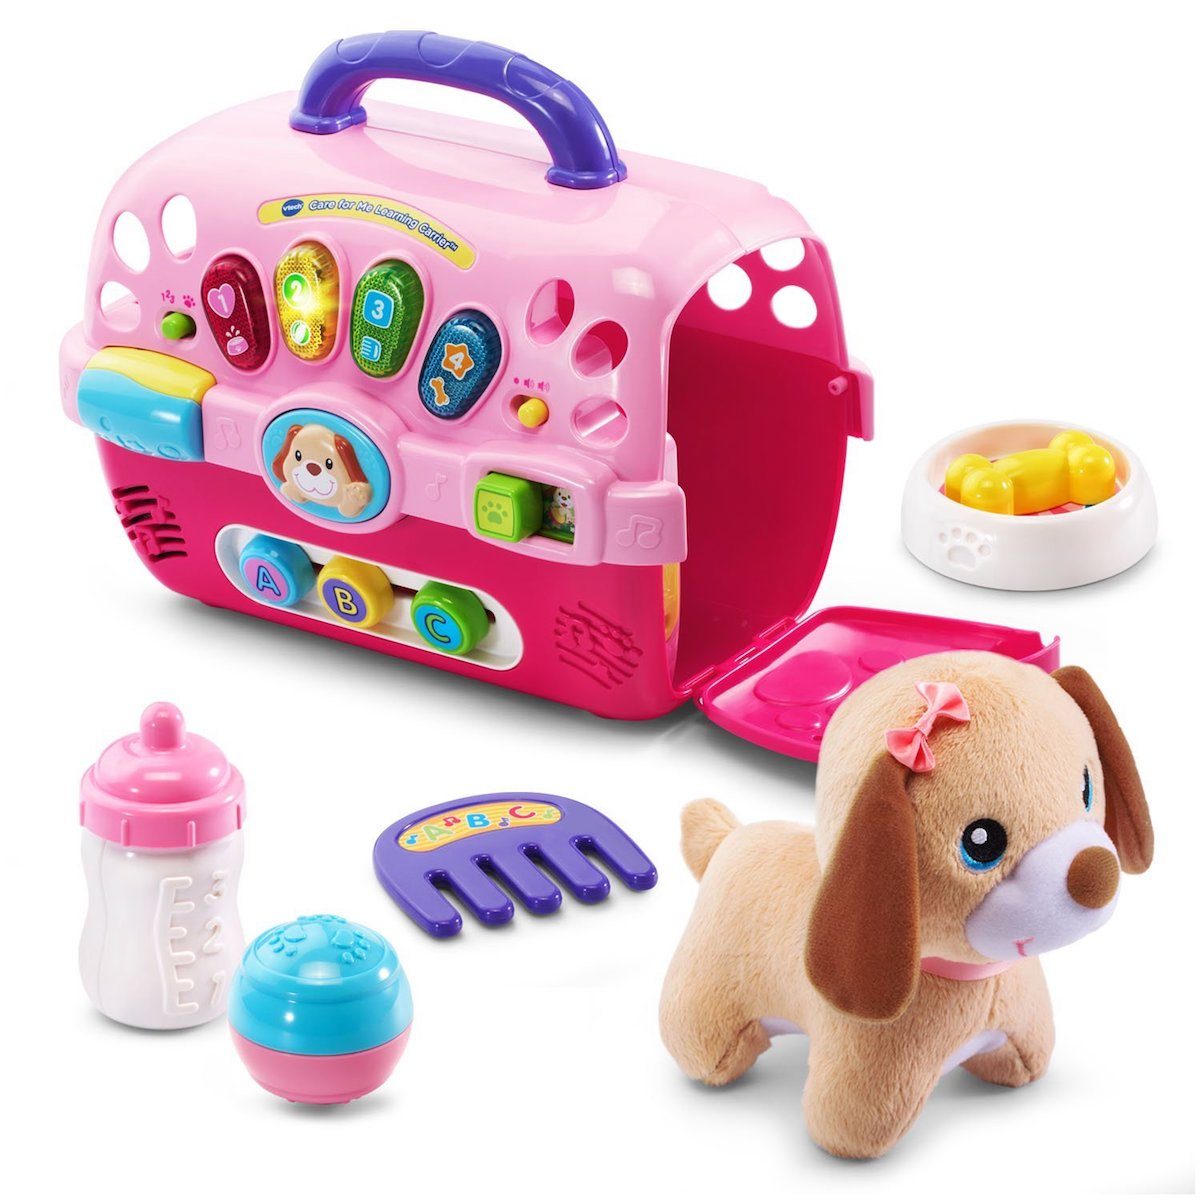 10 Award Winning Toys For 4-Year-Old Girls » Read Now!